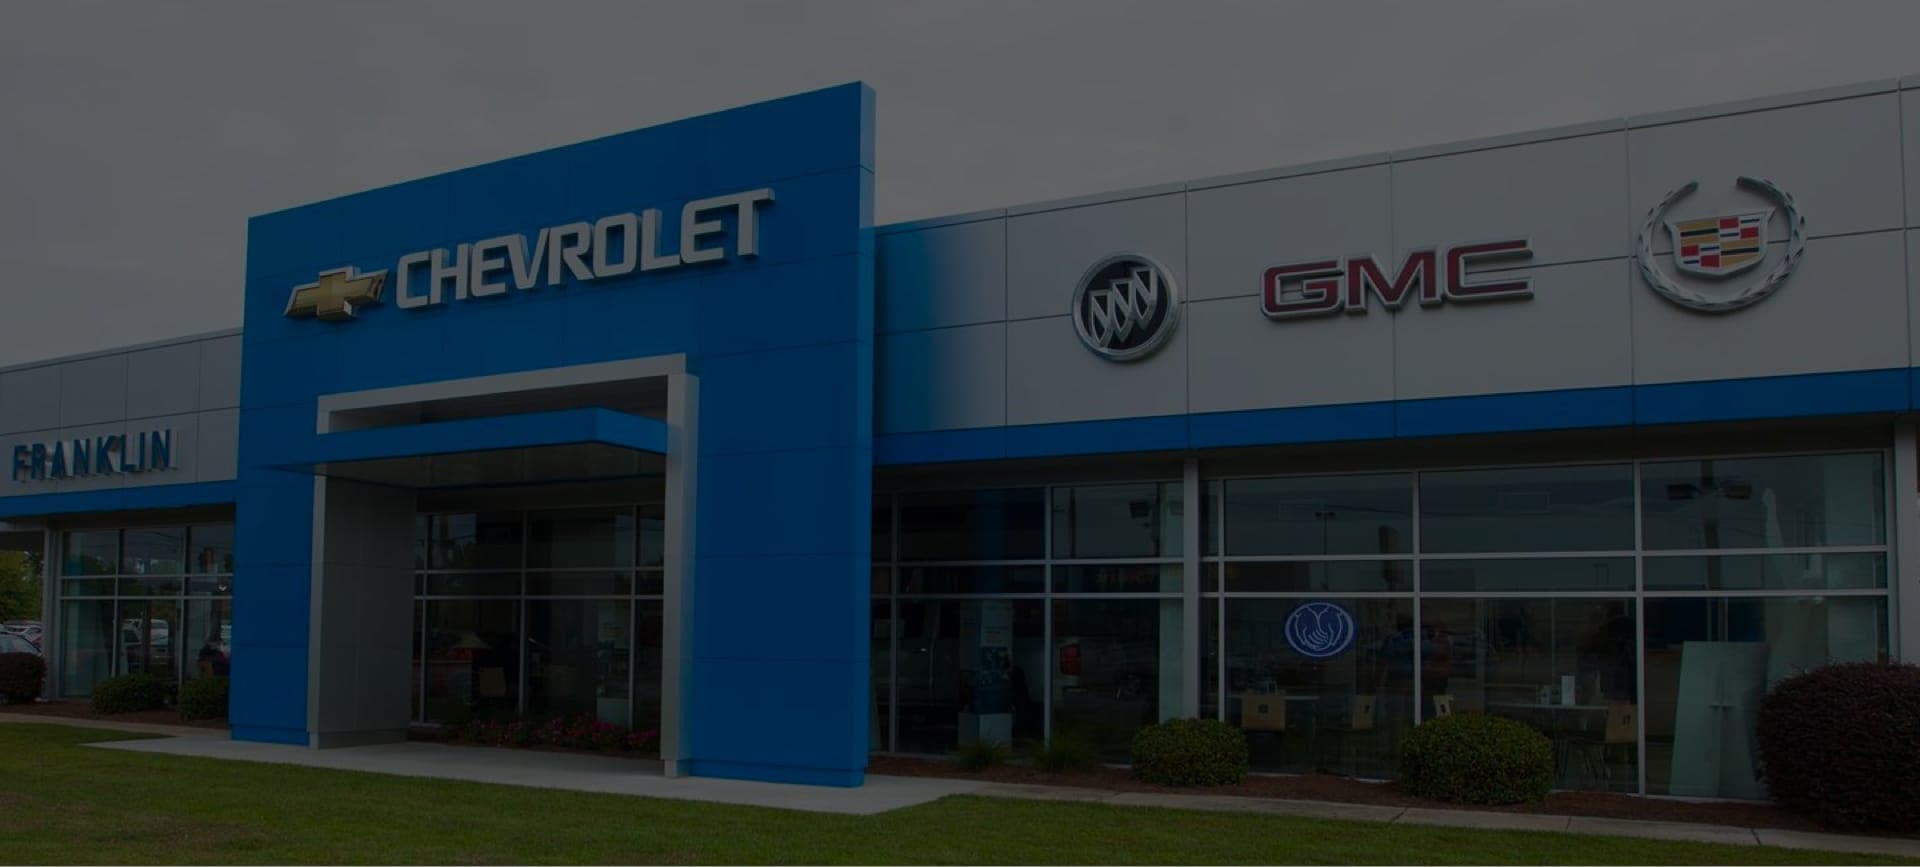 Outside view of the front of the dealership